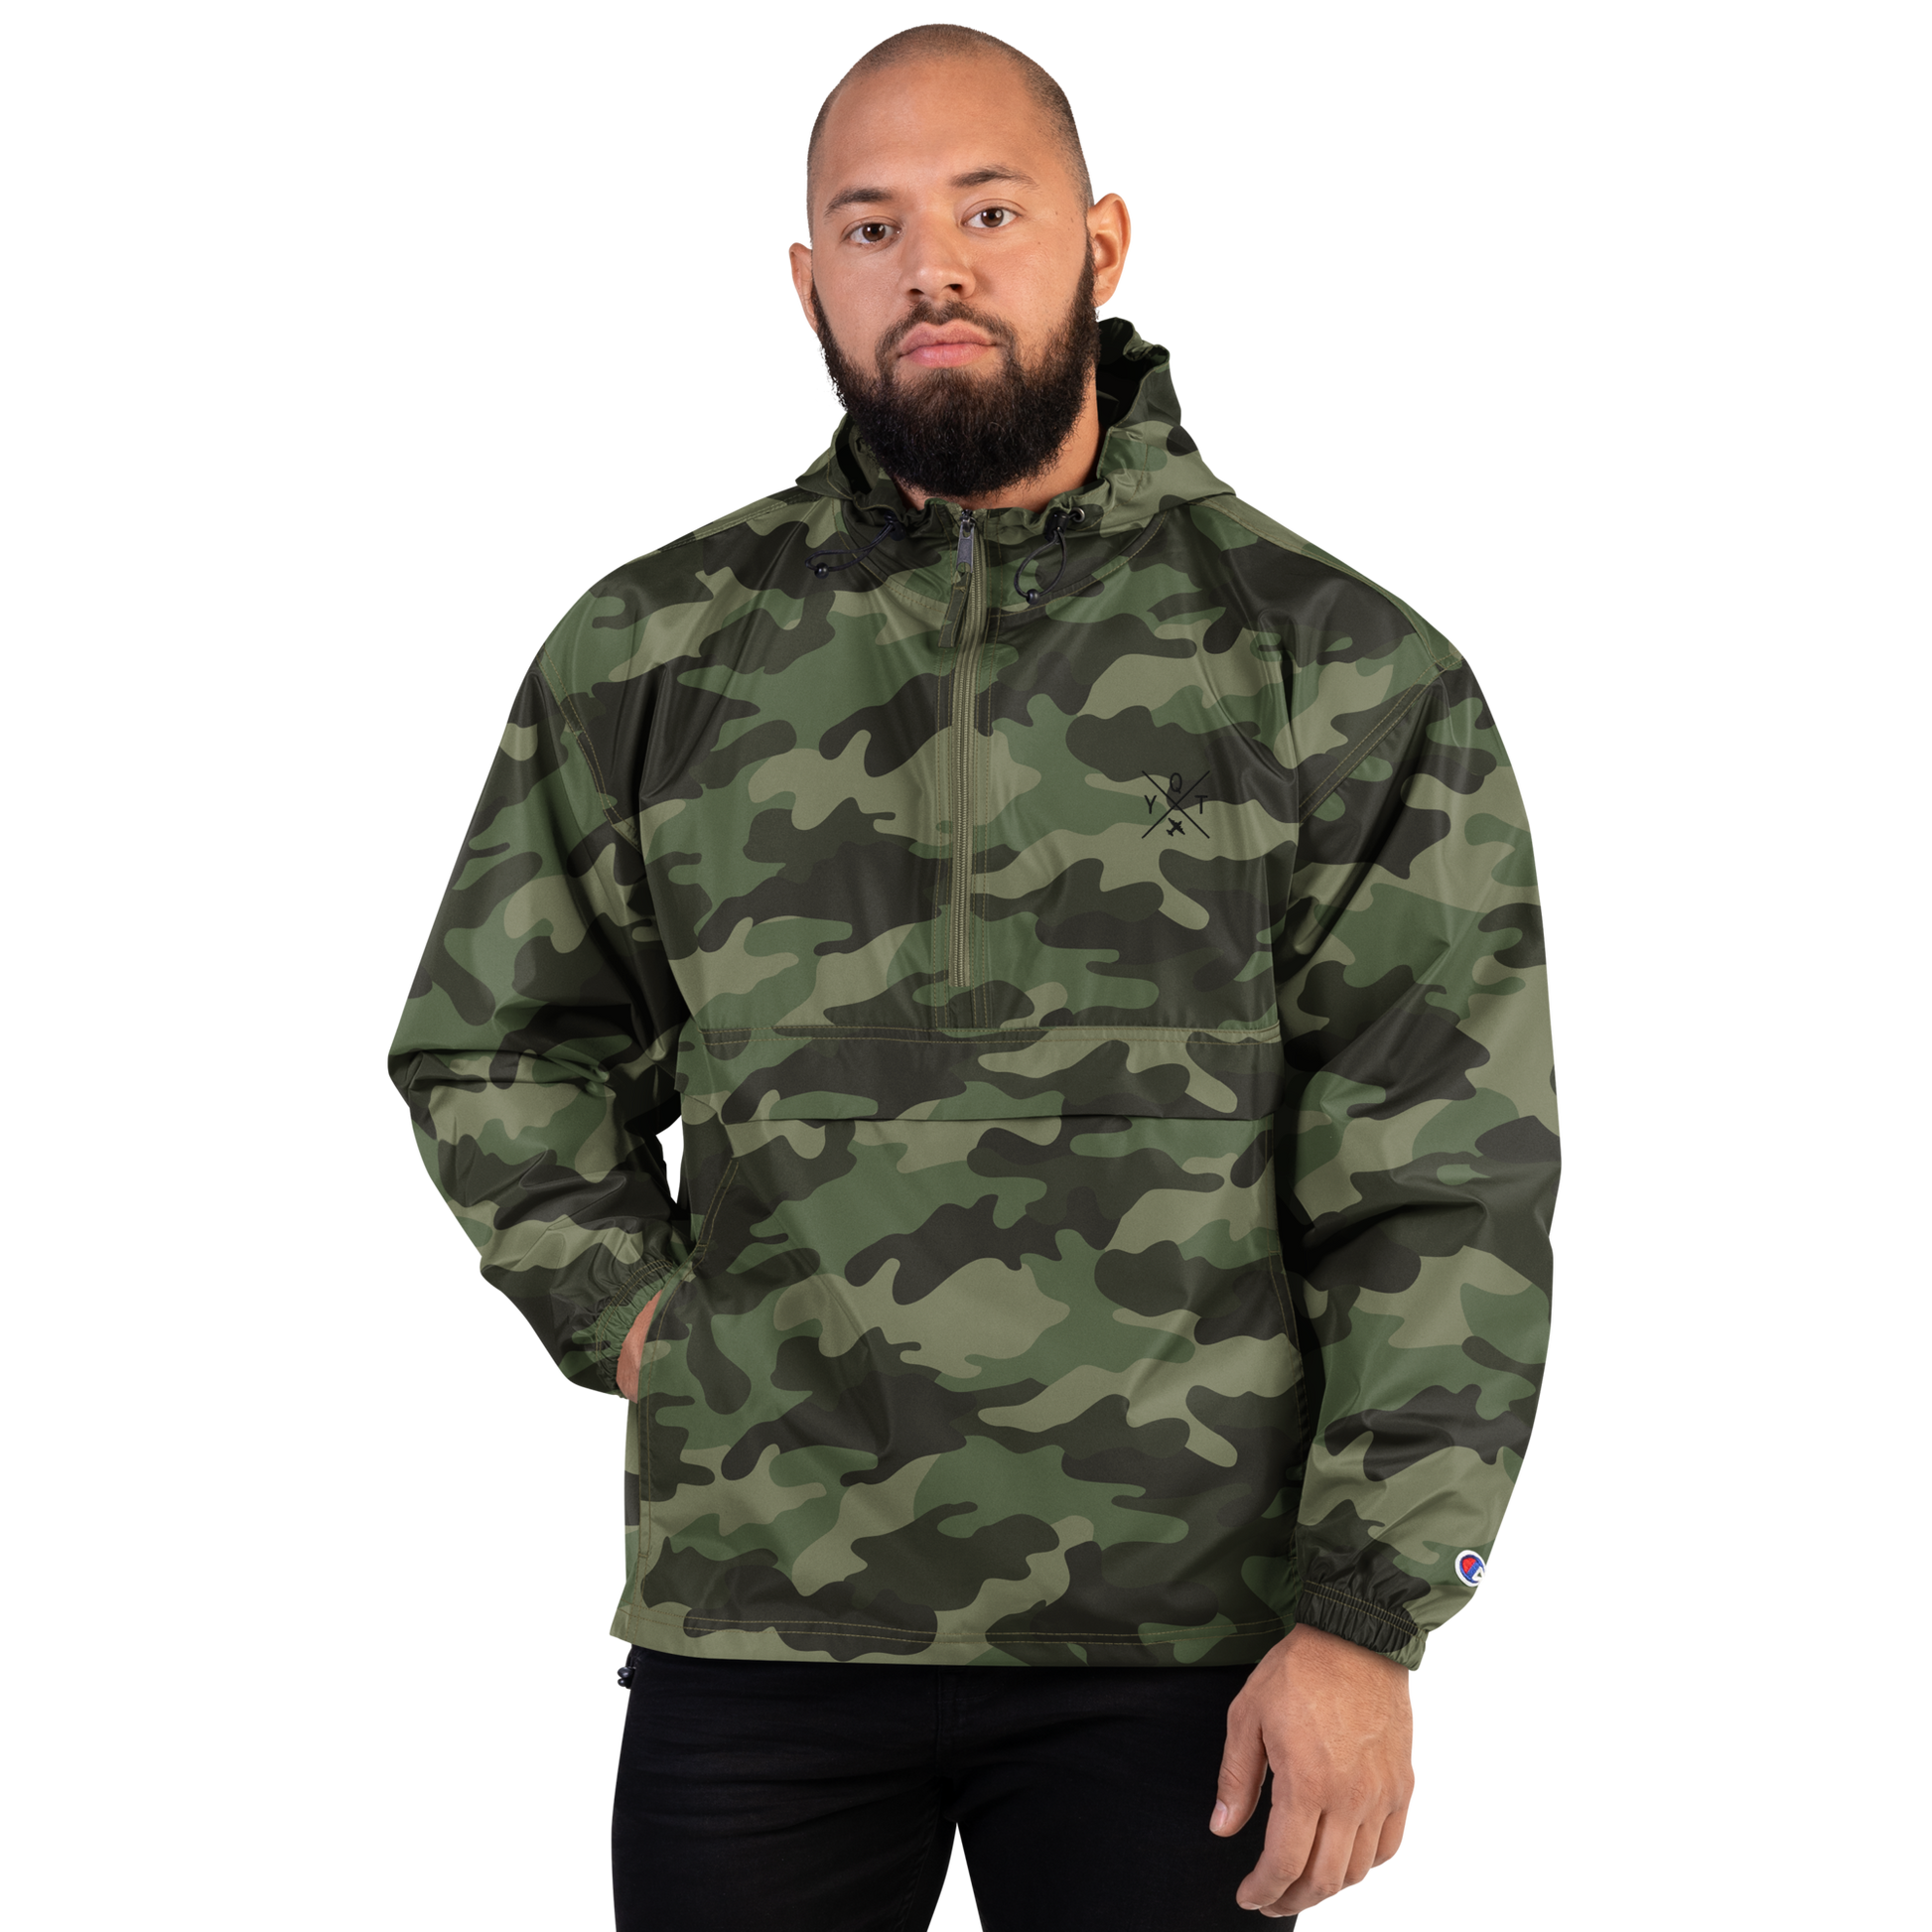 Crossed-X Packable Jacket • YQT Thunder Bay • YHM Designs - Image 13